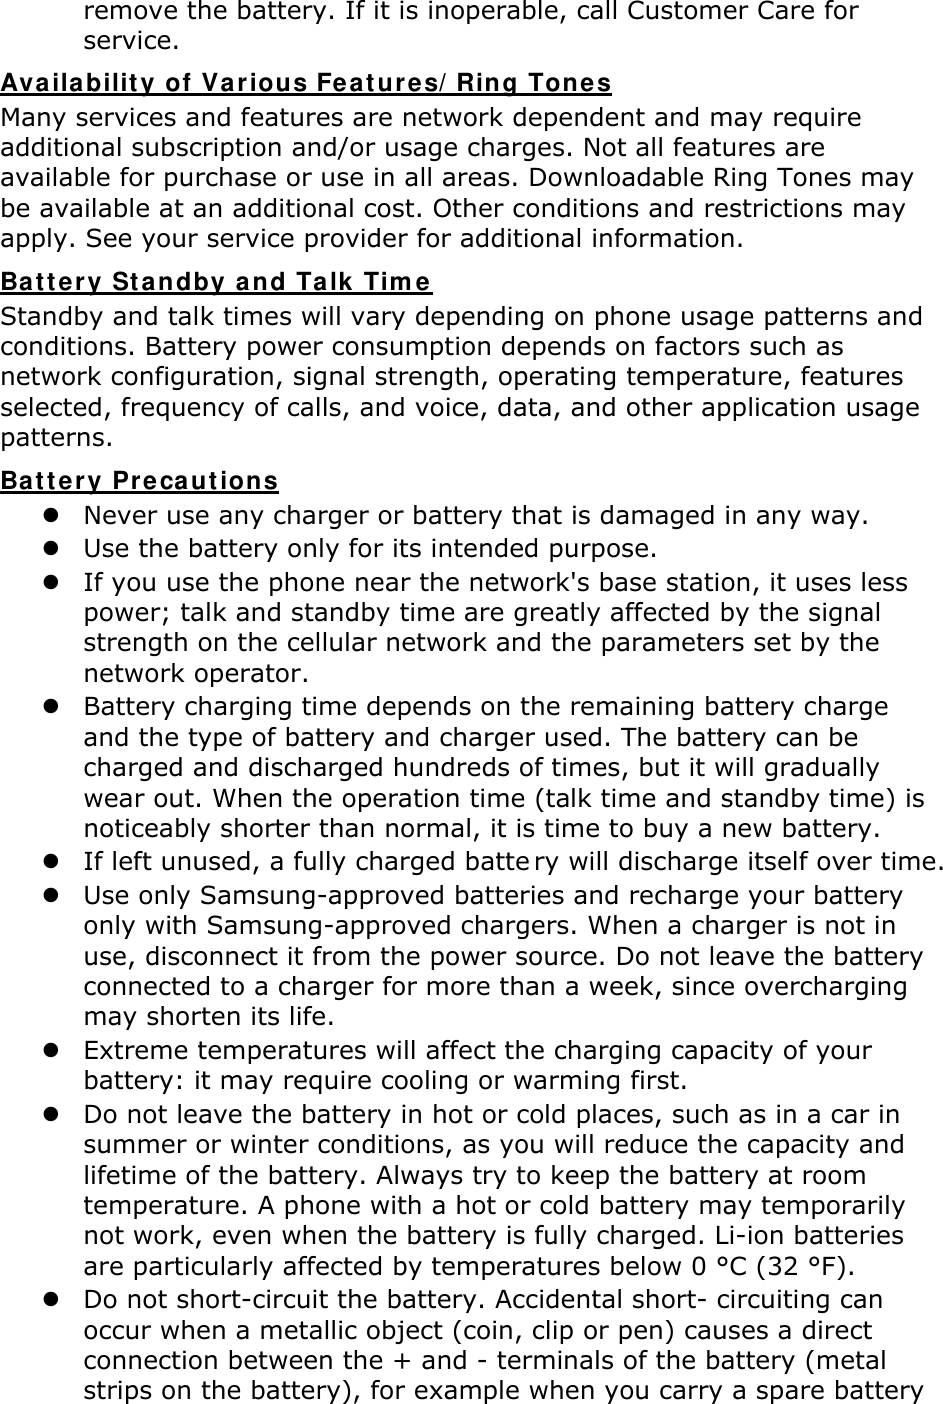 remove the battery. If it is inoperable, call Customer Care for service. Availabilit y of Var ious Featur es/ Ring Tones Many services and features are network dependent and may require additional subscription and/or usage charges. Not all features are available for purchase or use in all areas. Downloadable Ring Tones may be available at an additional cost. Other conditions and restrictions may apply. See your service provider for additional information. Ba t t ery St a ndby a nd Ta lk Tim e  Standby and talk times will vary depending on phone usage patterns and conditions. Battery power consumption depends on factors such as network configuration, signal strength, operating temperature, features selected, frequency of calls, and voice, data, and other application usage patterns.   Ba t t ery Precautions z Never use any charger or battery that is damaged in any way. z Use the battery only for its intended purpose. z If you use the phone near the network&apos;s base station, it uses less power; talk and standby time are greatly affected by the signal strength on the cellular network and the parameters set by the network operator. z Battery charging time depends on the remaining battery charge and the type of battery and charger used. The battery can be charged and discharged hundreds of times, but it will gradually wear out. When the operation time (talk time and standby time) is noticeably shorter than normal, it is time to buy a new battery. z If left unused, a fully charged batte ry will discharge itself over time.  z Use only Samsung-approved batteries and recharge your battery only with Samsung-approved chargers. When a charger is not in use, disconnect it from the power source. Do not leave the battery connected to a charger for more than a week, since overcharging may shorten its life. z Extreme temperatures will affect the charging capacity of your battery: it may require cooling or warming first. z Do not leave the battery in hot or cold places, such as in a car in summer or winter conditions, as you will reduce the capacity and lifetime of the battery. Always try to keep the battery at room temperature. A phone with a hot or cold battery may temporarily not work, even when the battery is fully charged. Li-ion batteries are particularly affected by temperatures below 0 °C (32 °F). z Do not short-circuit the battery. Accidental short- circuiting can occur when a metallic object (coin, clip or pen) causes a direct connection between the + and - terminals of the battery (metal strips on the battery), for example when you carry a spare battery 